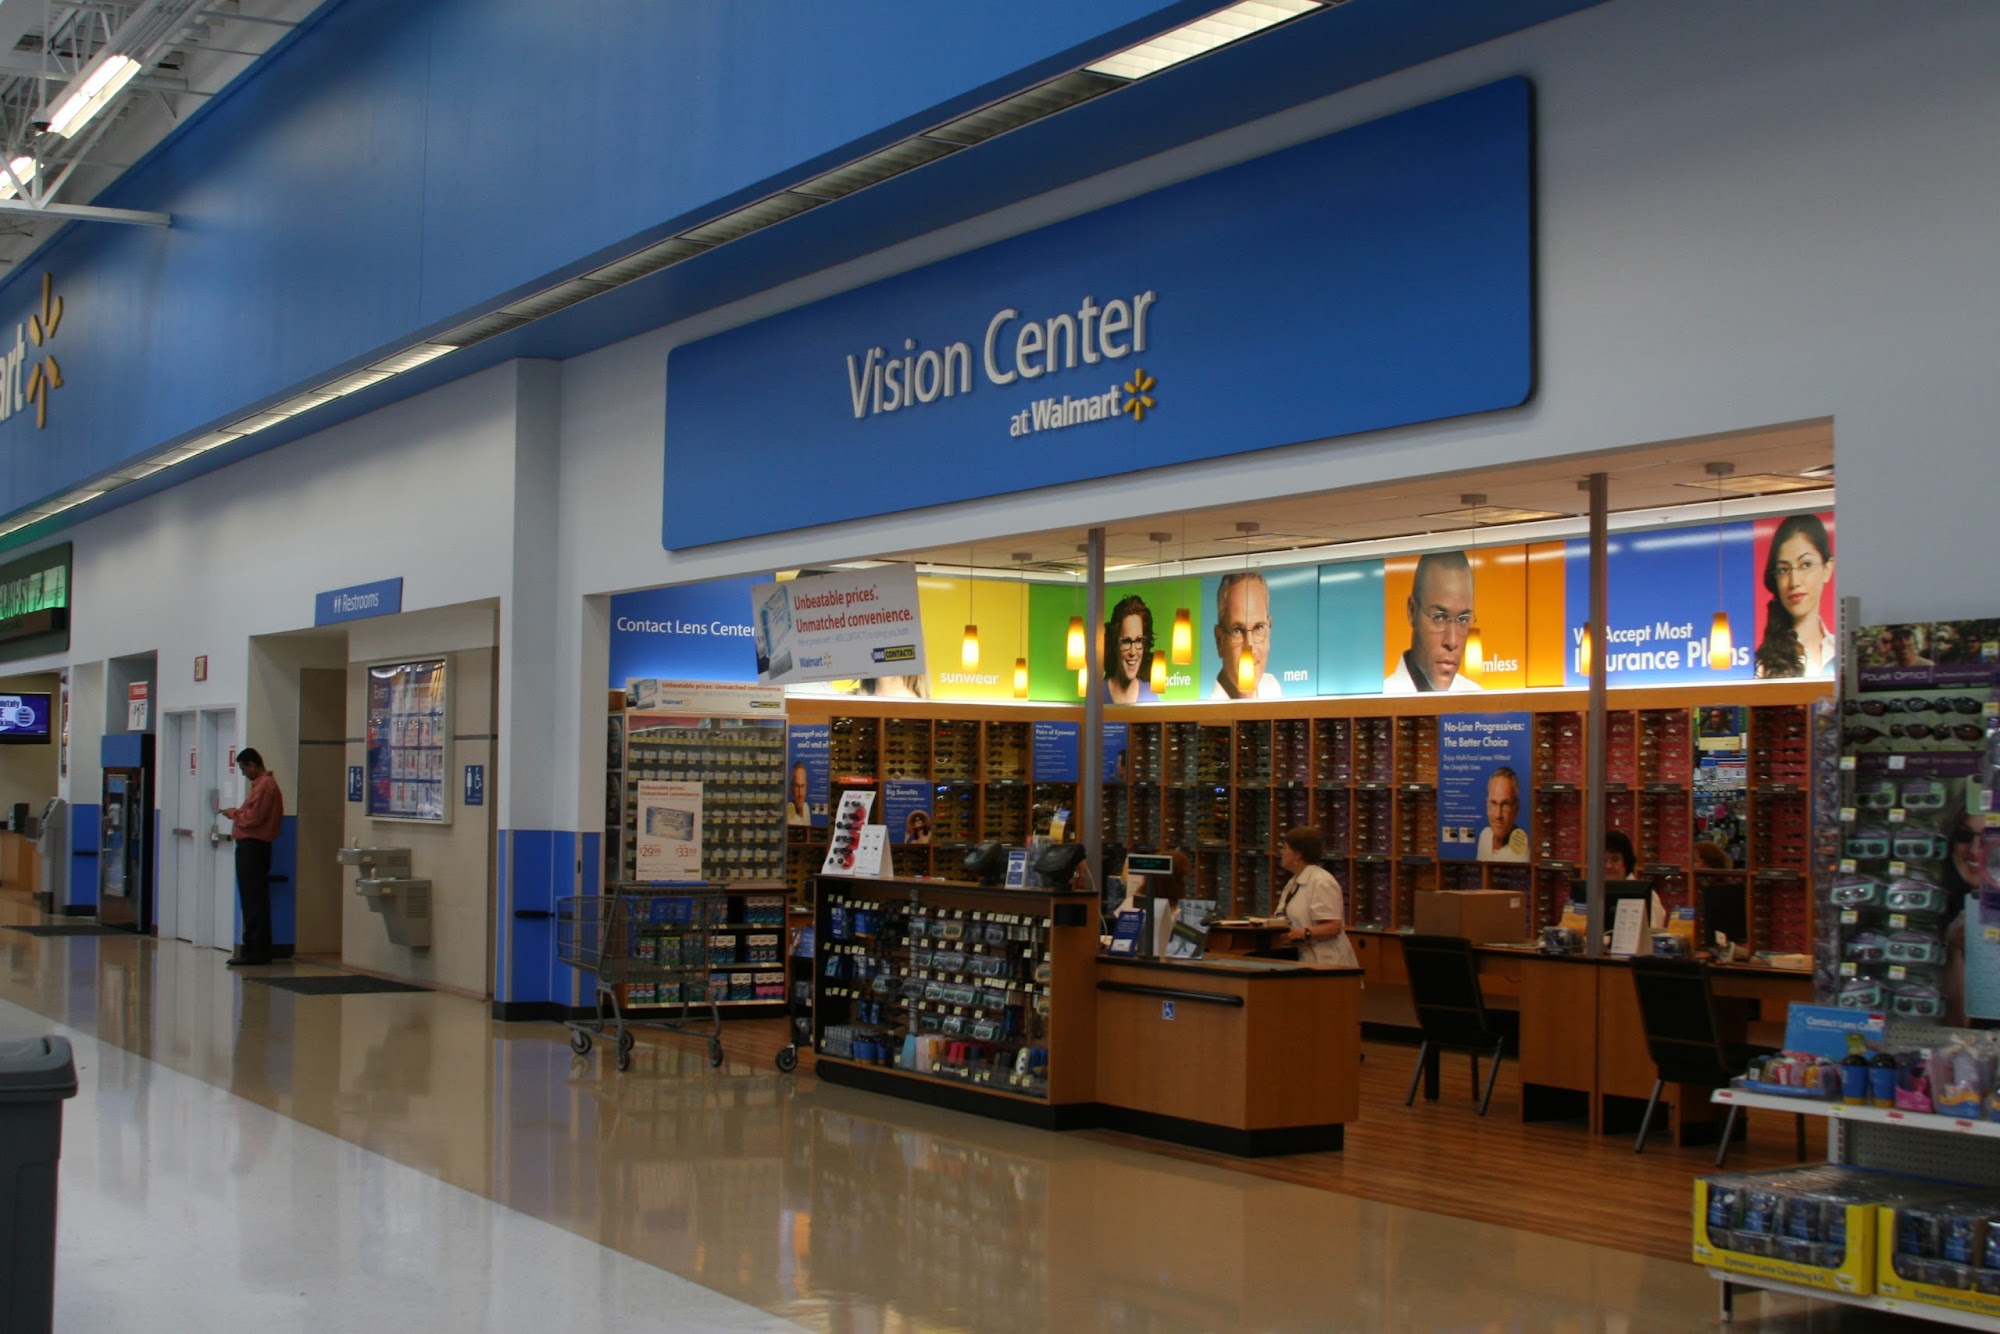 Walmart Vision & Glasses 814 W Bell Ave, Knoxville Iowa 50138